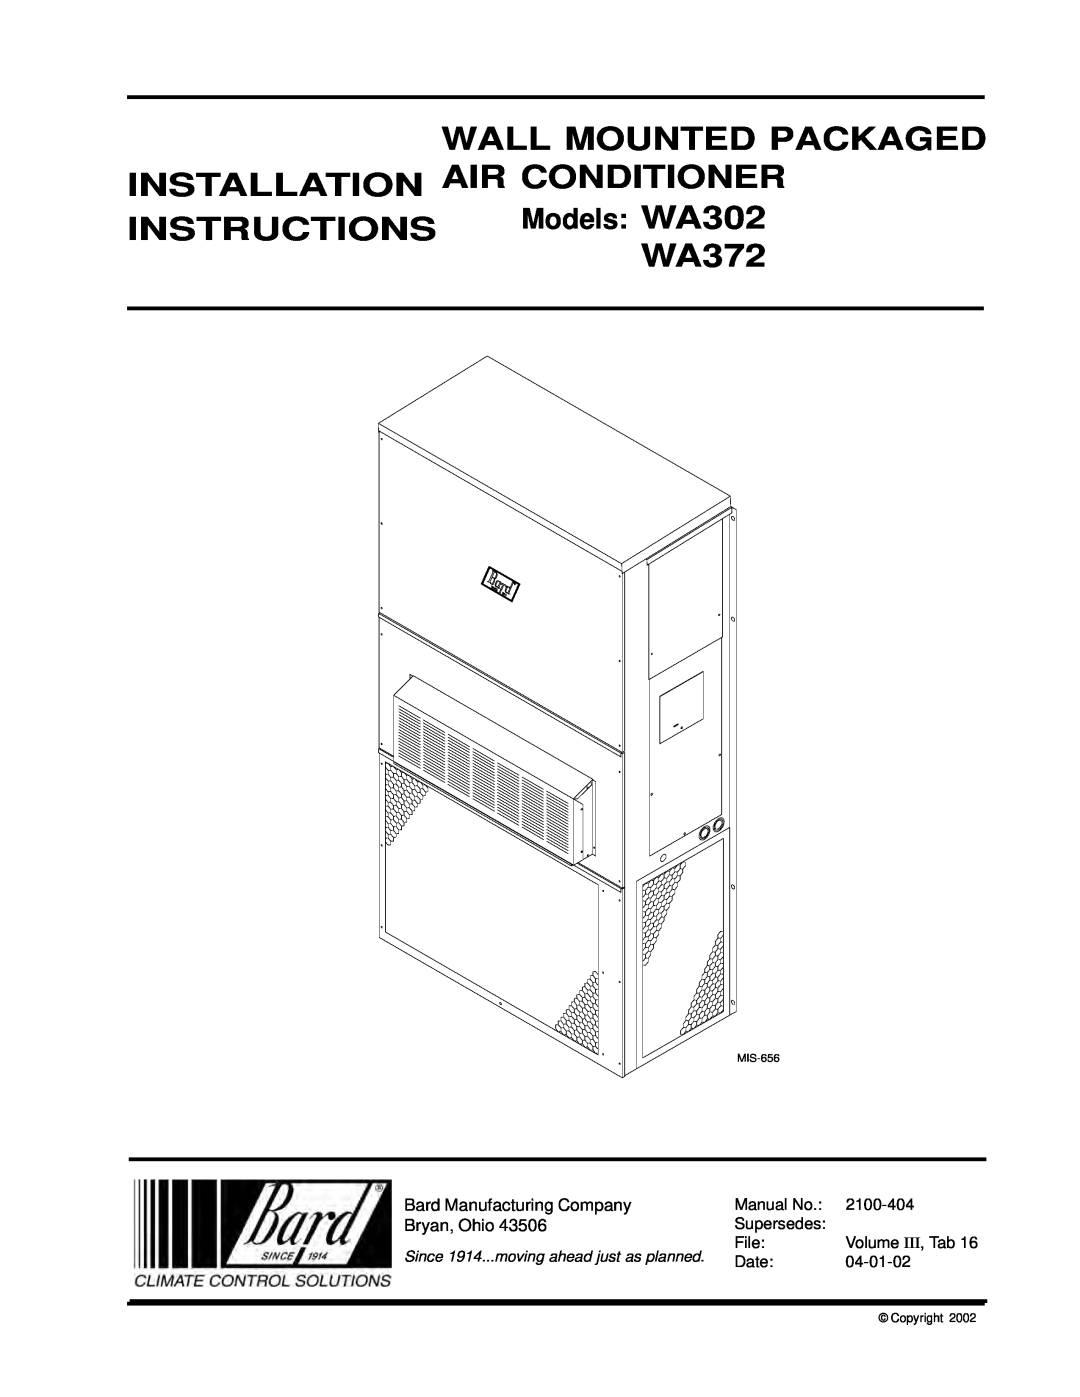 Bard MIS-656 installation instructions Wall Mounted Packaged, Installation Air Conditioner, Instructions, WA372, Manual No 